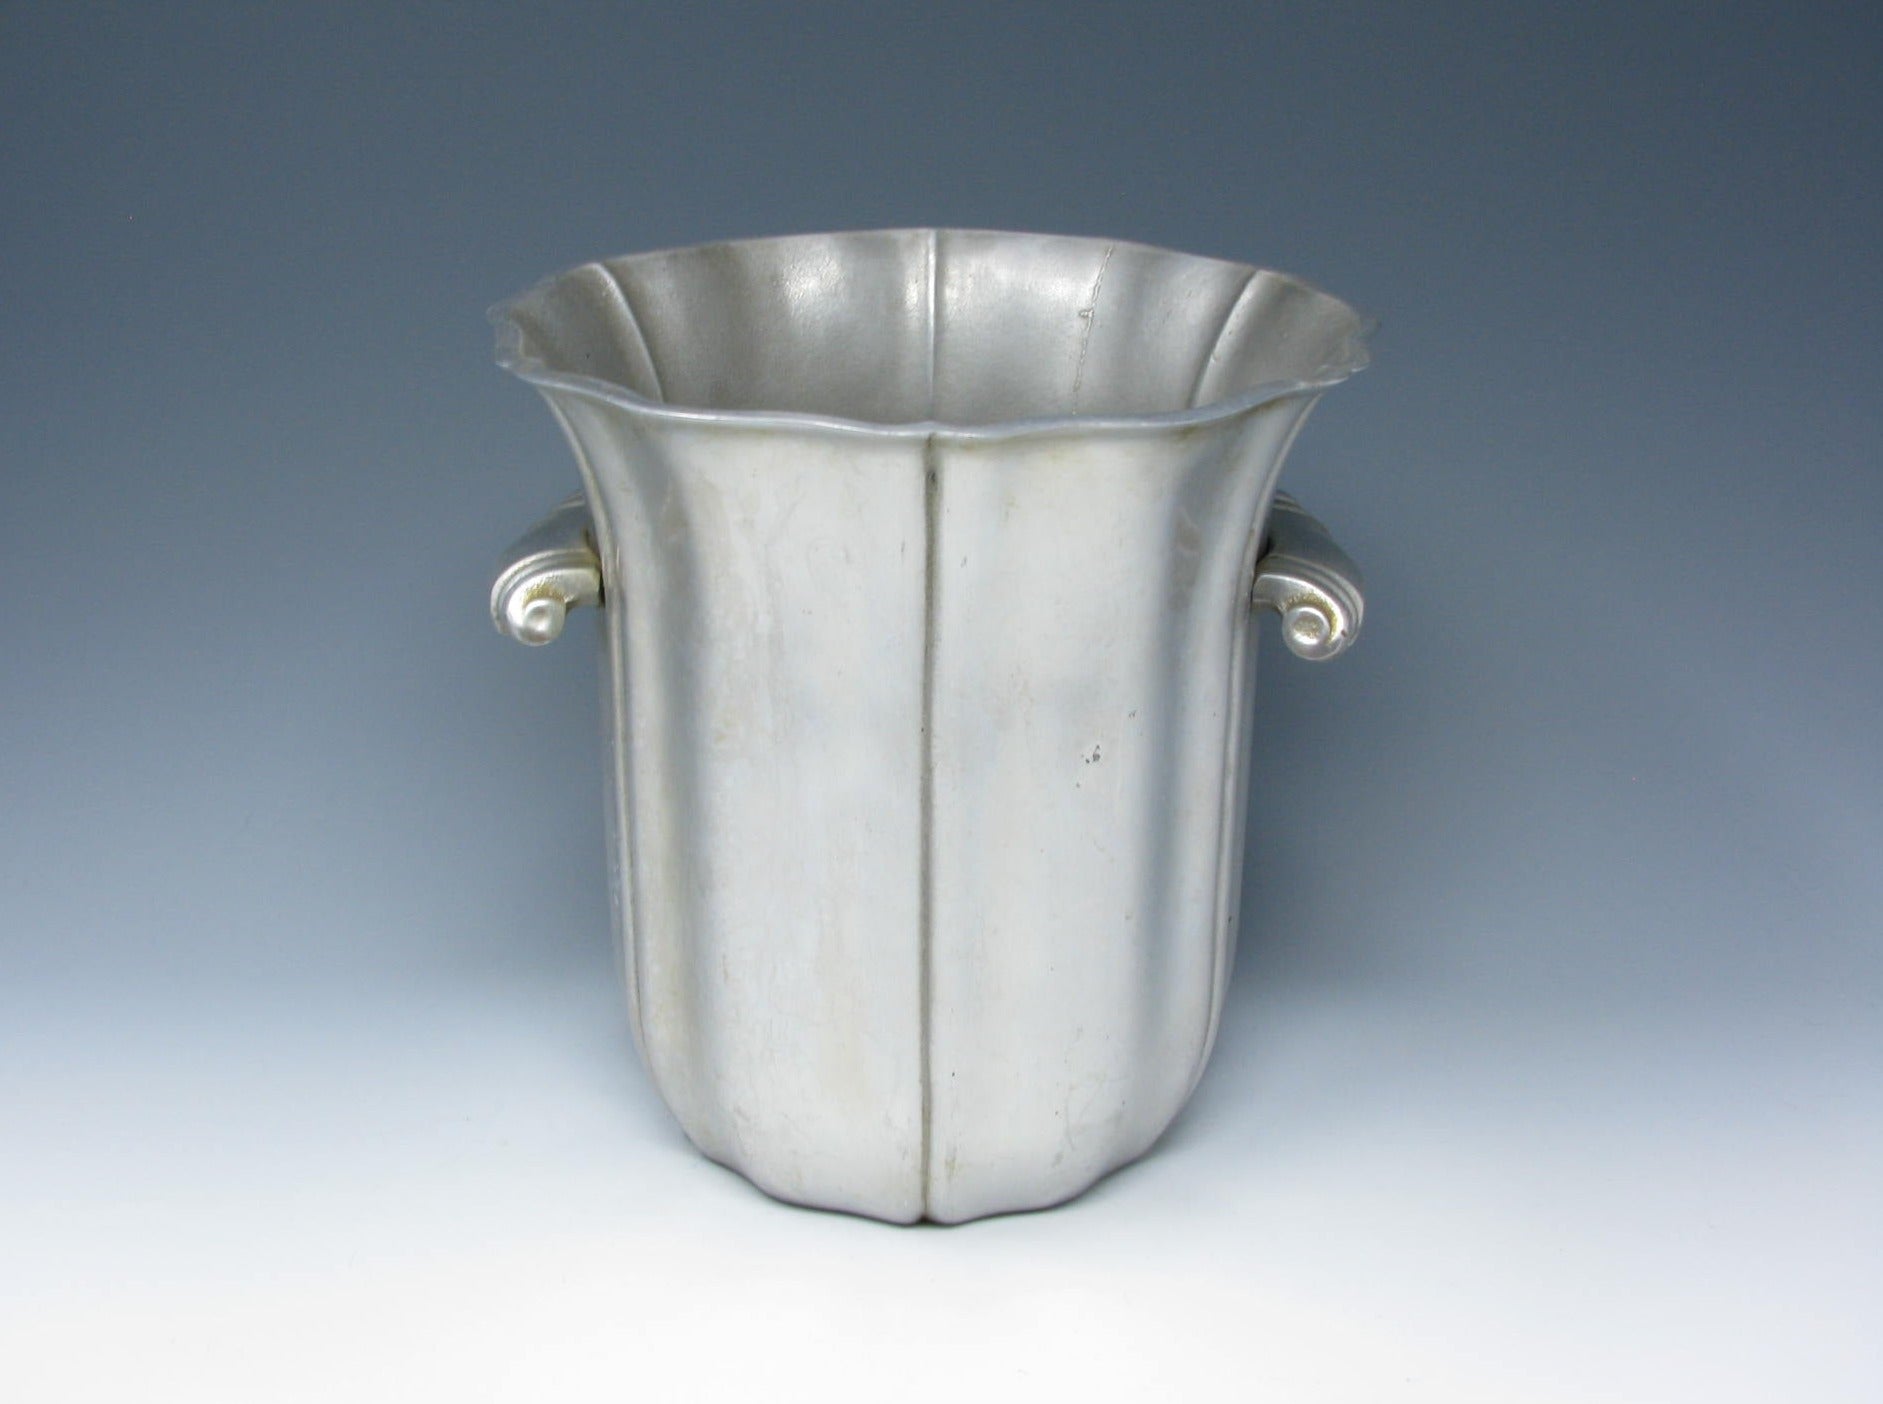 edgebrookhouse - Vintage Wilton Armetale Country French Satin Hollowware Champagne Chiller Ice Bucket